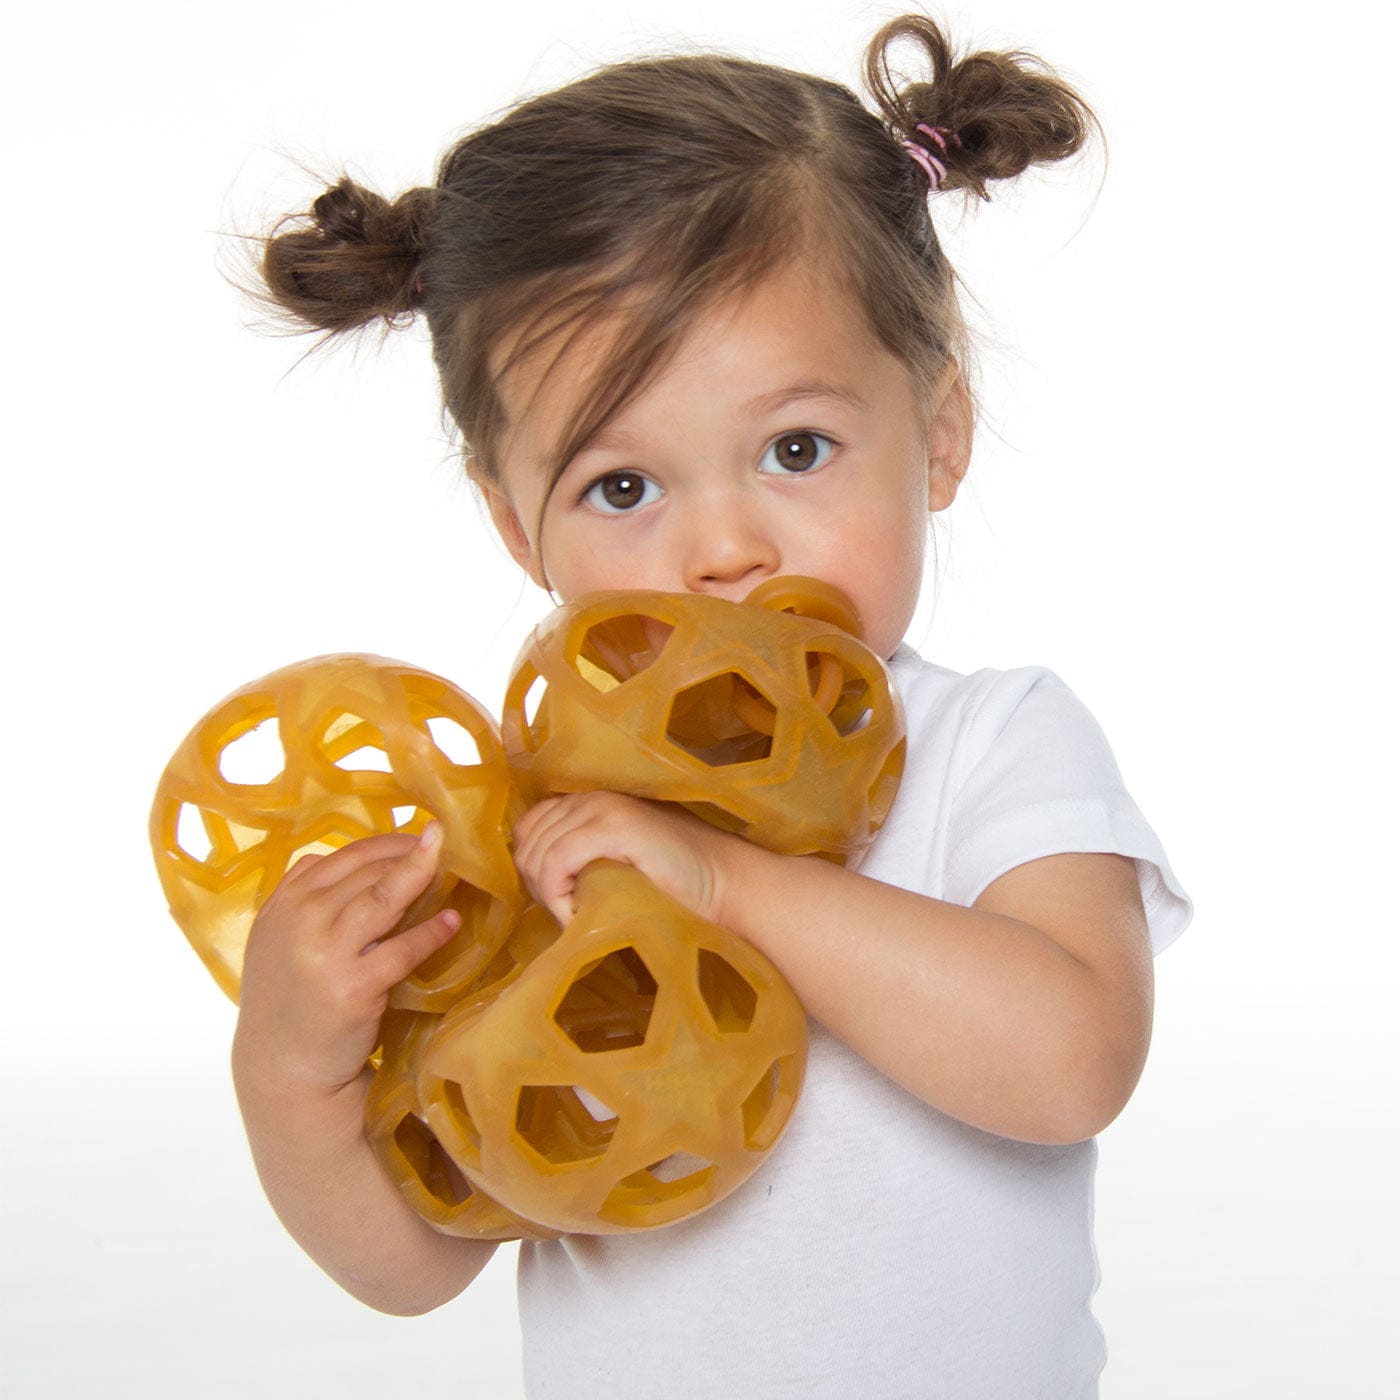 Hevea Star Ball – Tactile Toy Hevea Star Ball – Tactile Toy 